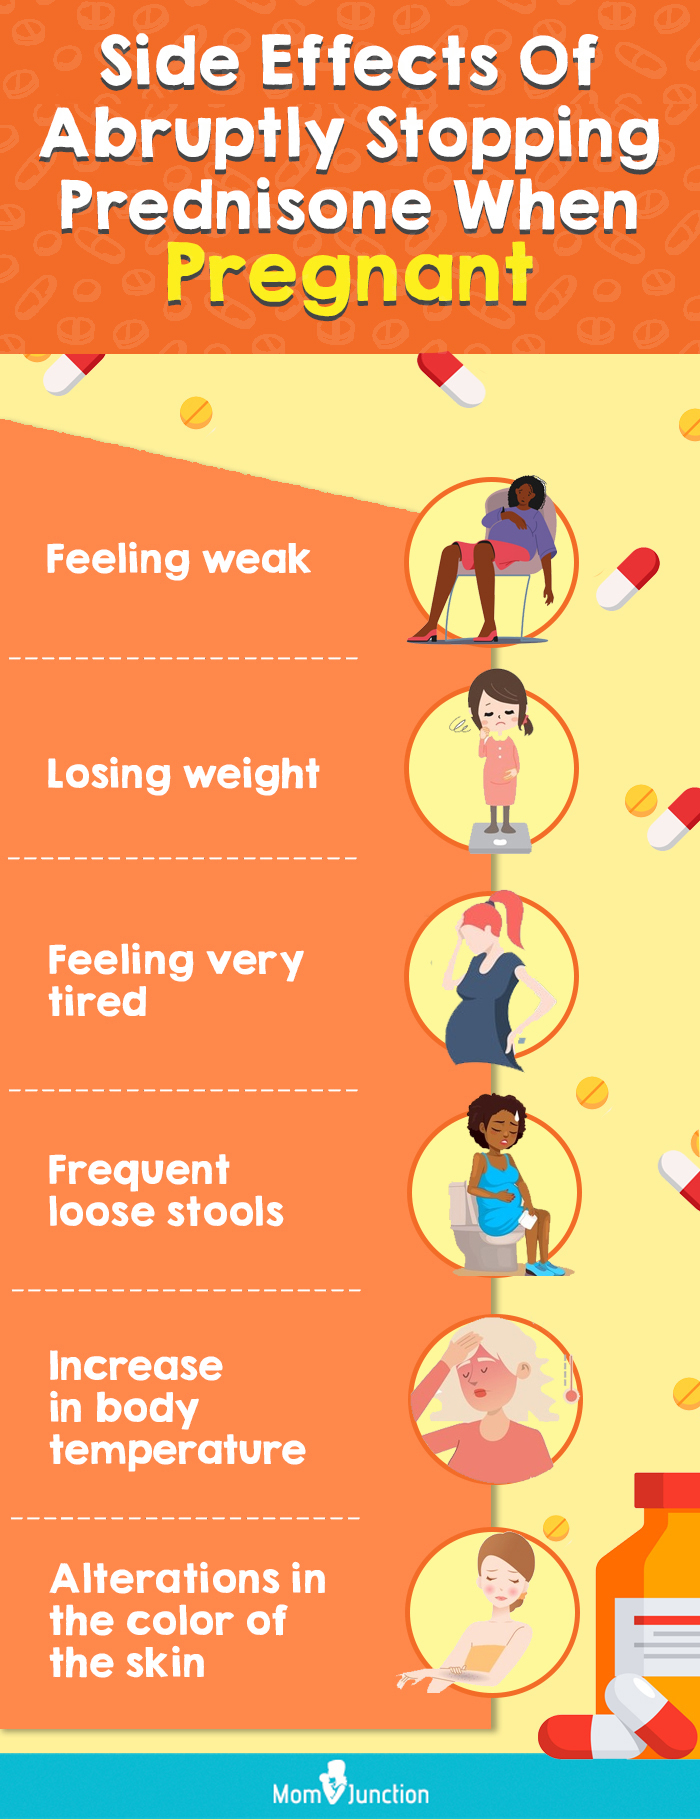 side effects of abruptly stopping prednisone when pregnant (infographic)